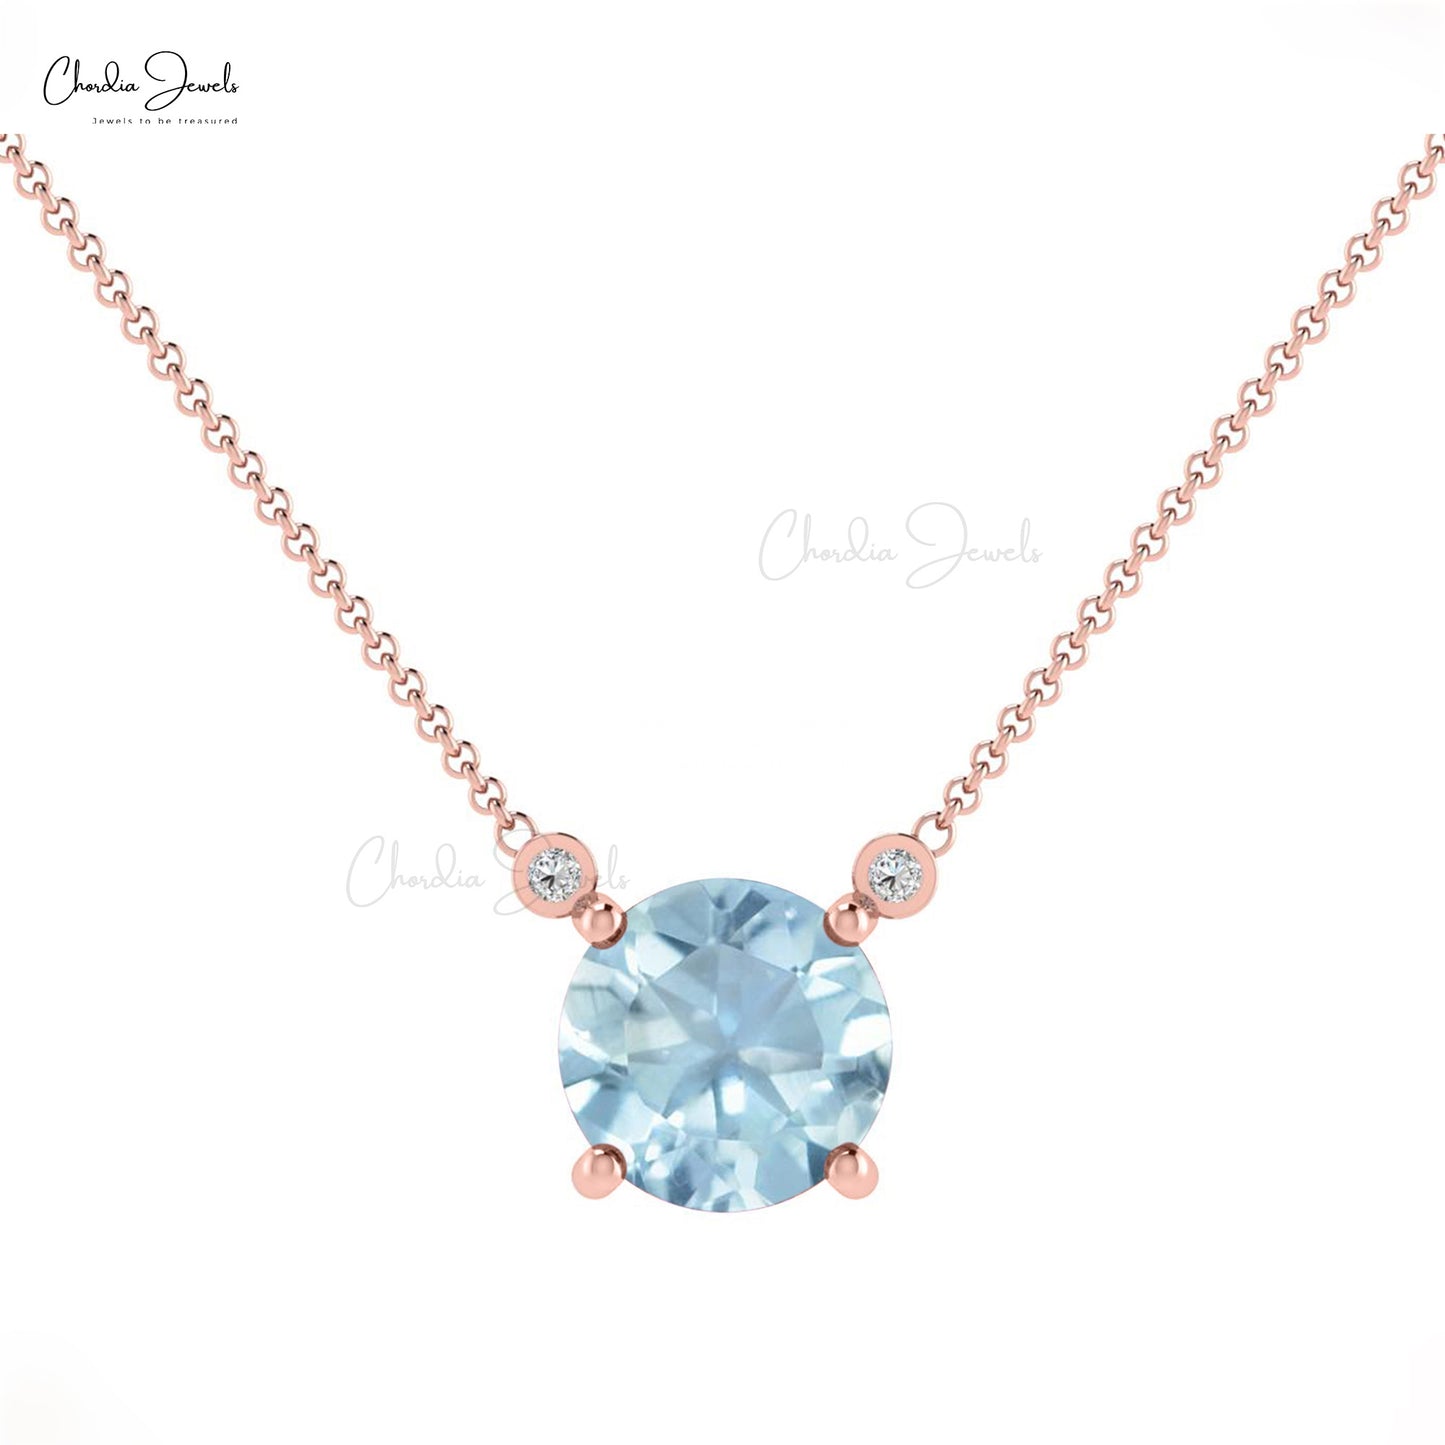 Load image into Gallery viewer, Round 6mm Natural Aquamarine Necklace in 14k Solid Gold Handmade Gemstone
